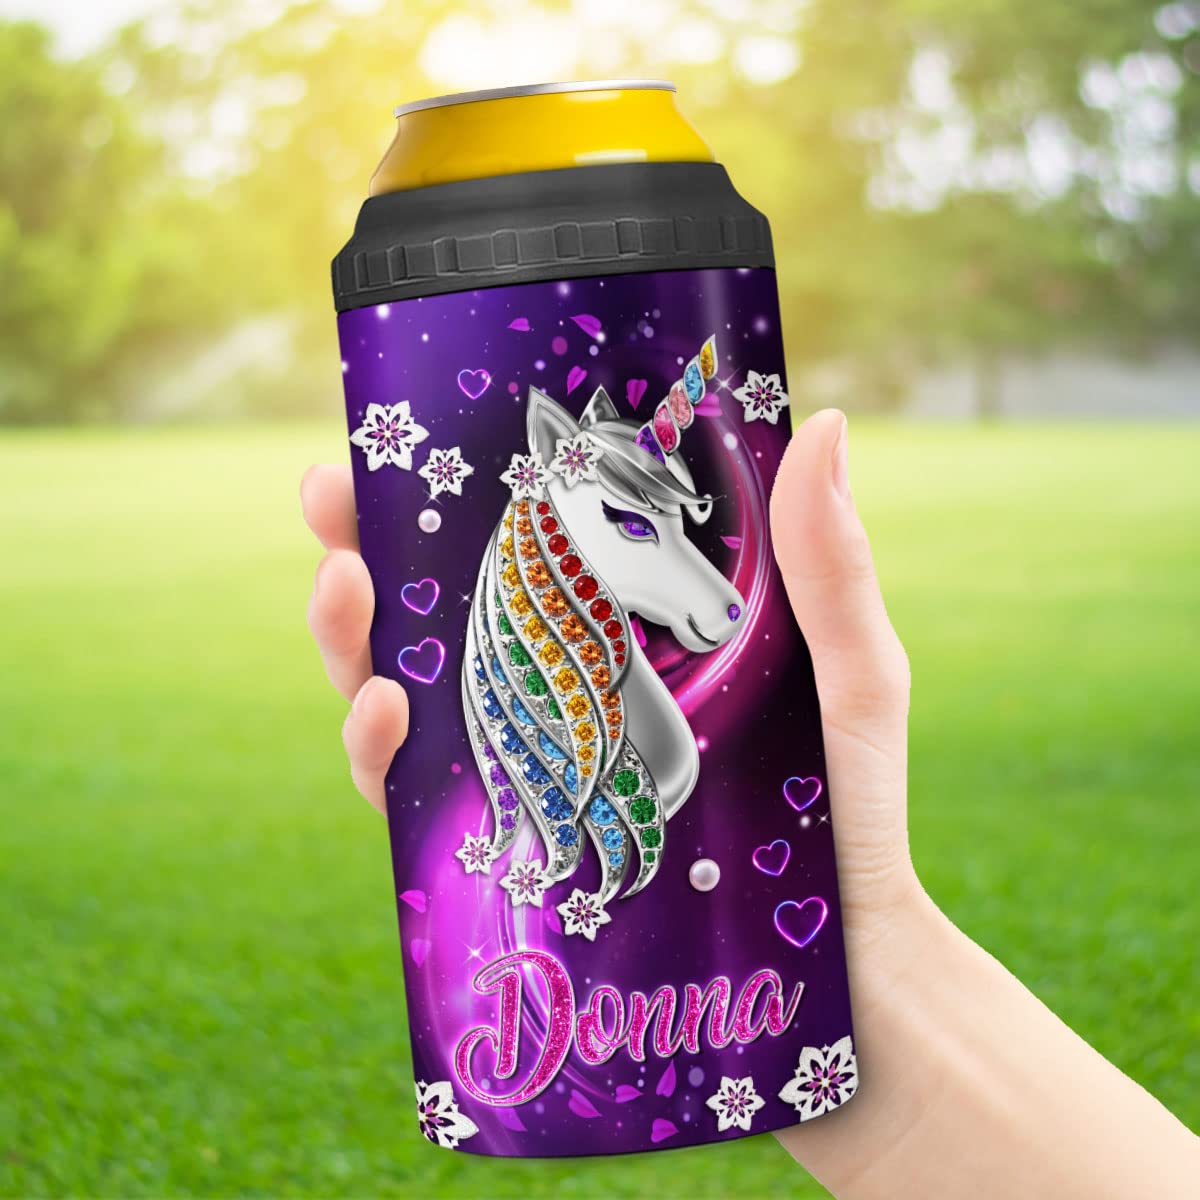 KOIXA Unicorn Can Cooler Insulated 4-in-1 16 Oz She Is Beauty She Is Grace She Can Stab You In The Face Stainless Steel Can Holder Travel Cup Funny Sarcastic Gifts For Women